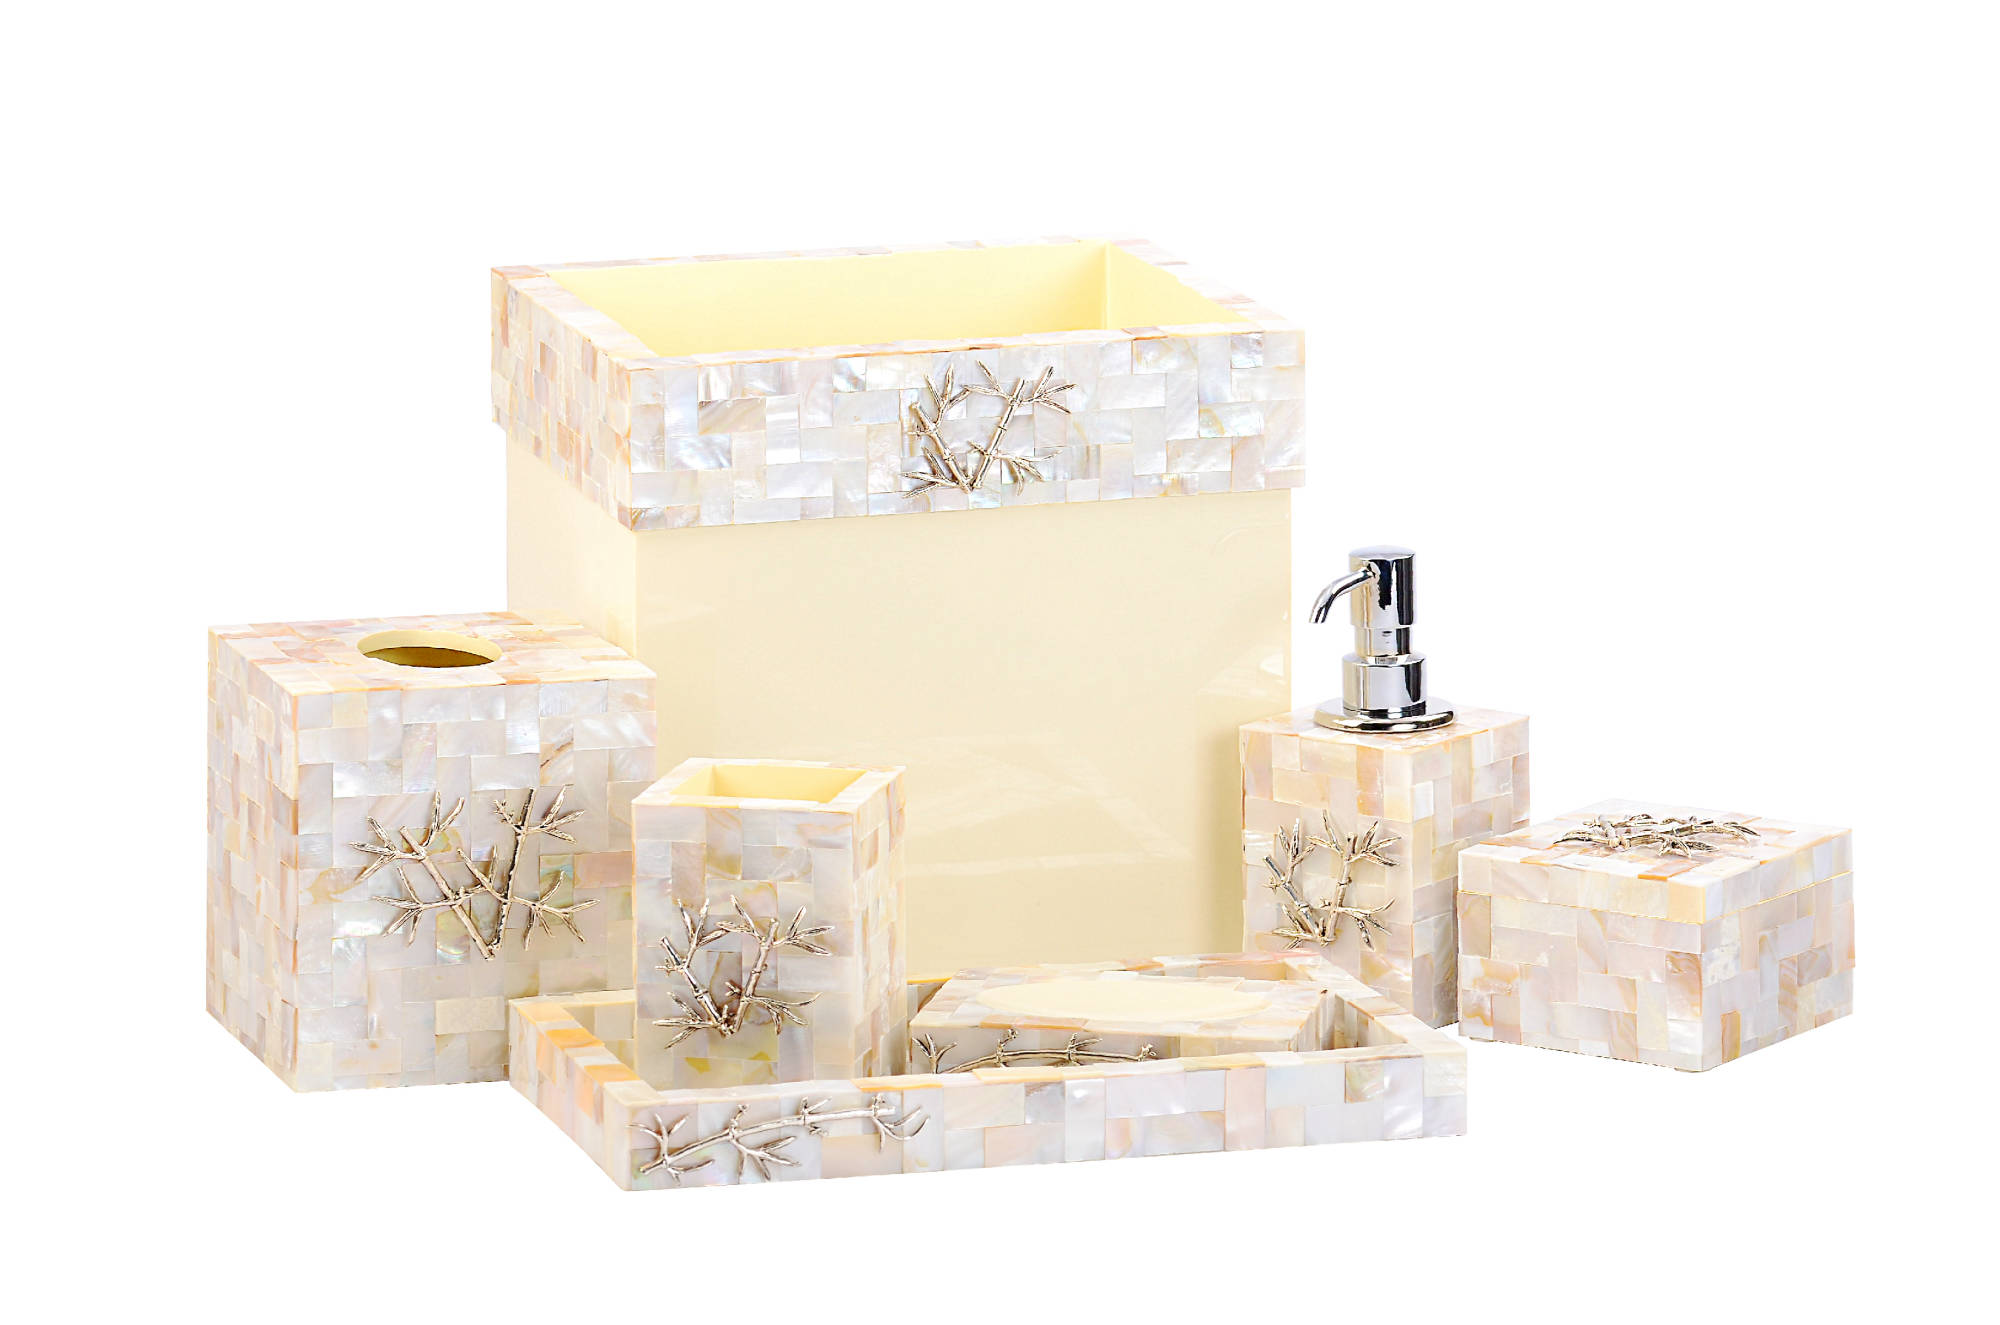 Rough kabibi shell bath set with silver plated bamboo tree accent